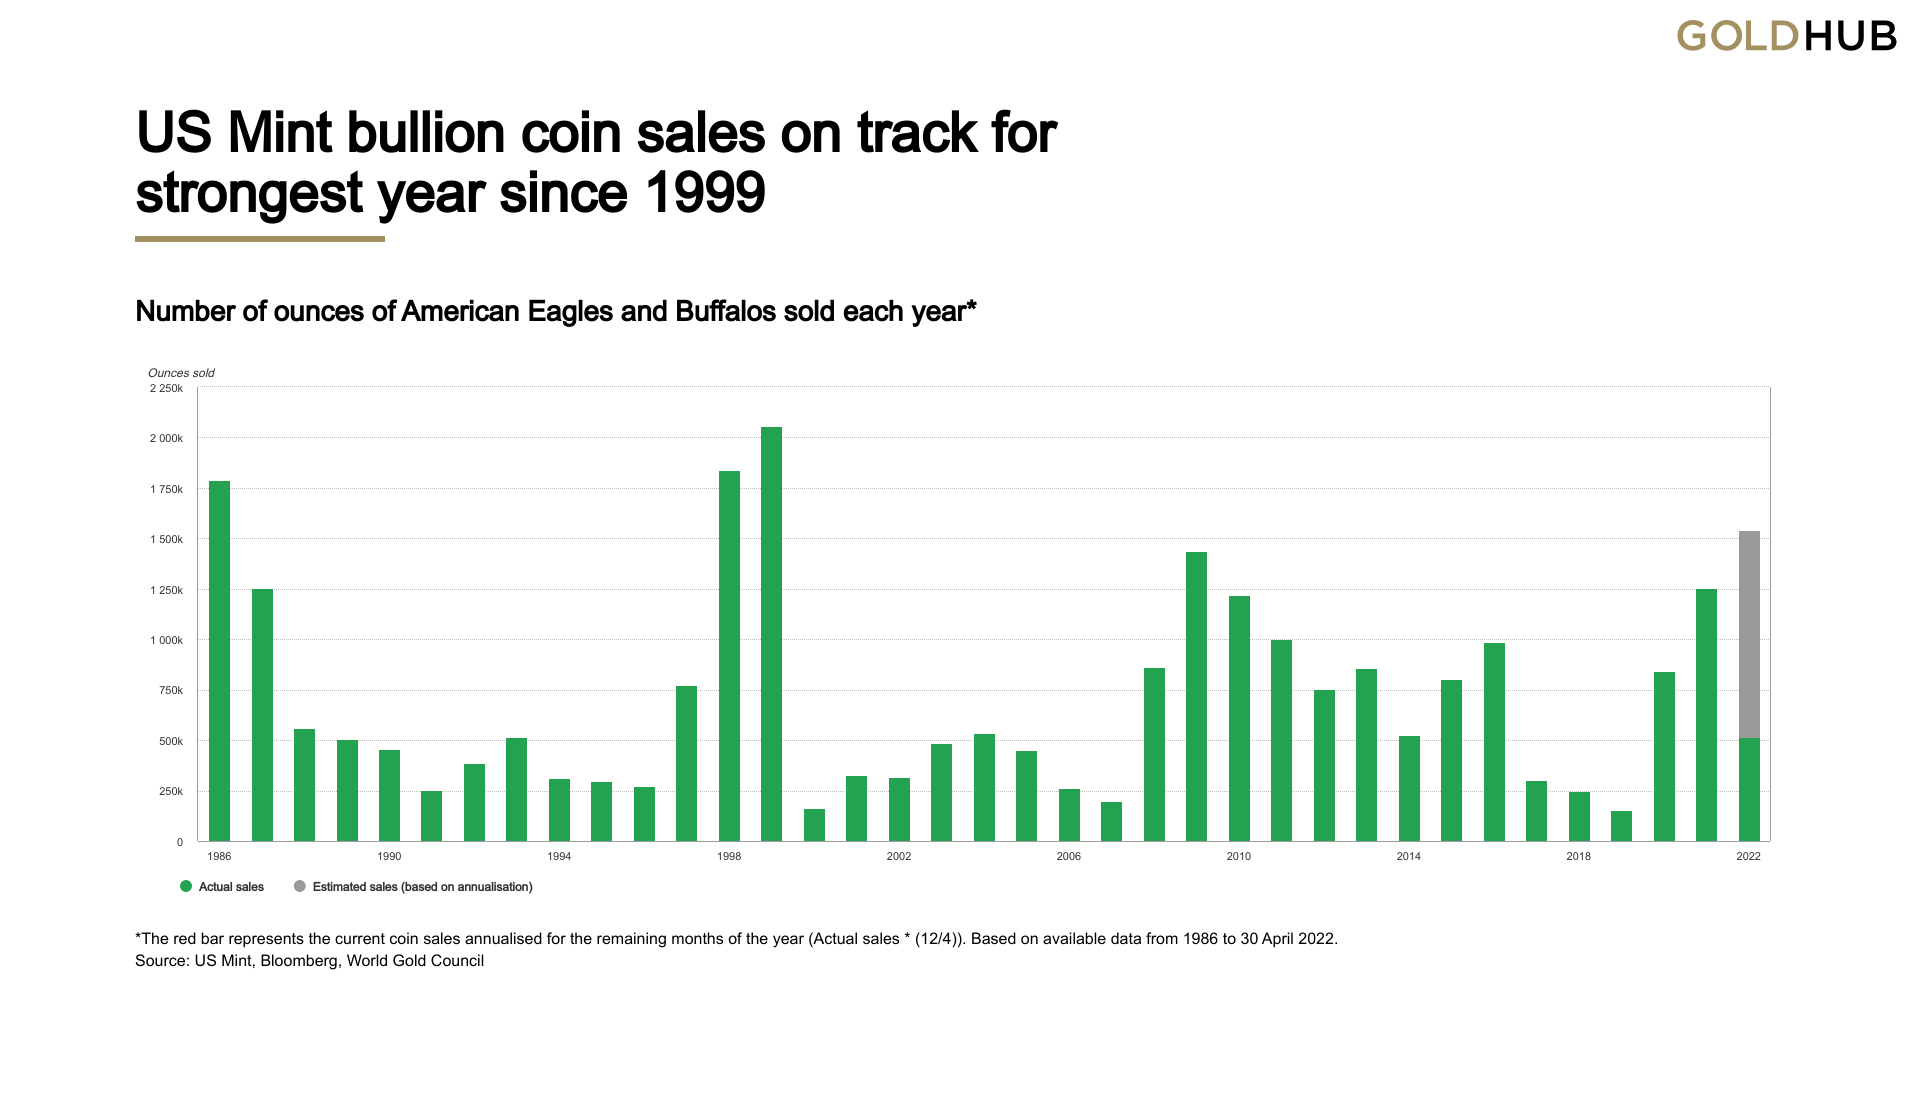 bar chart showing gold coin sales since 1986 with projection for 2022